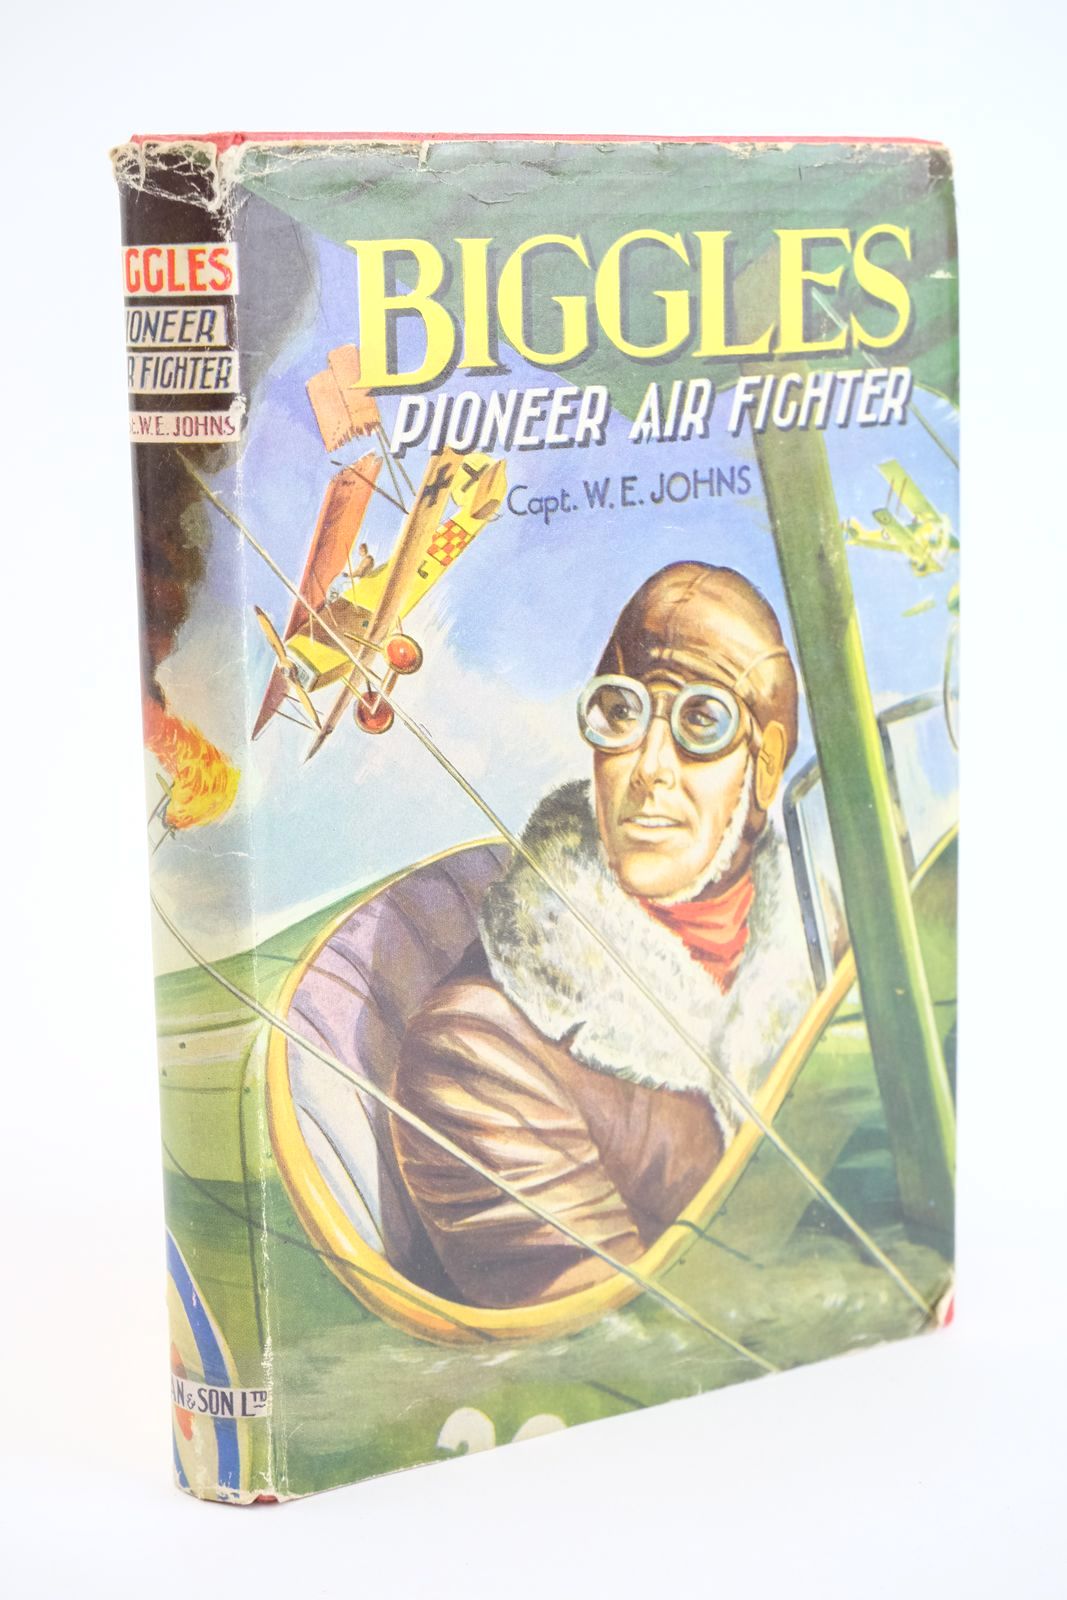 Photo of BIGGLES PIONEER AIR FIGHTER written by Johns, W.E. published by Dean & Son Ltd. (STOCK CODE: 1323882)  for sale by Stella & Rose's Books